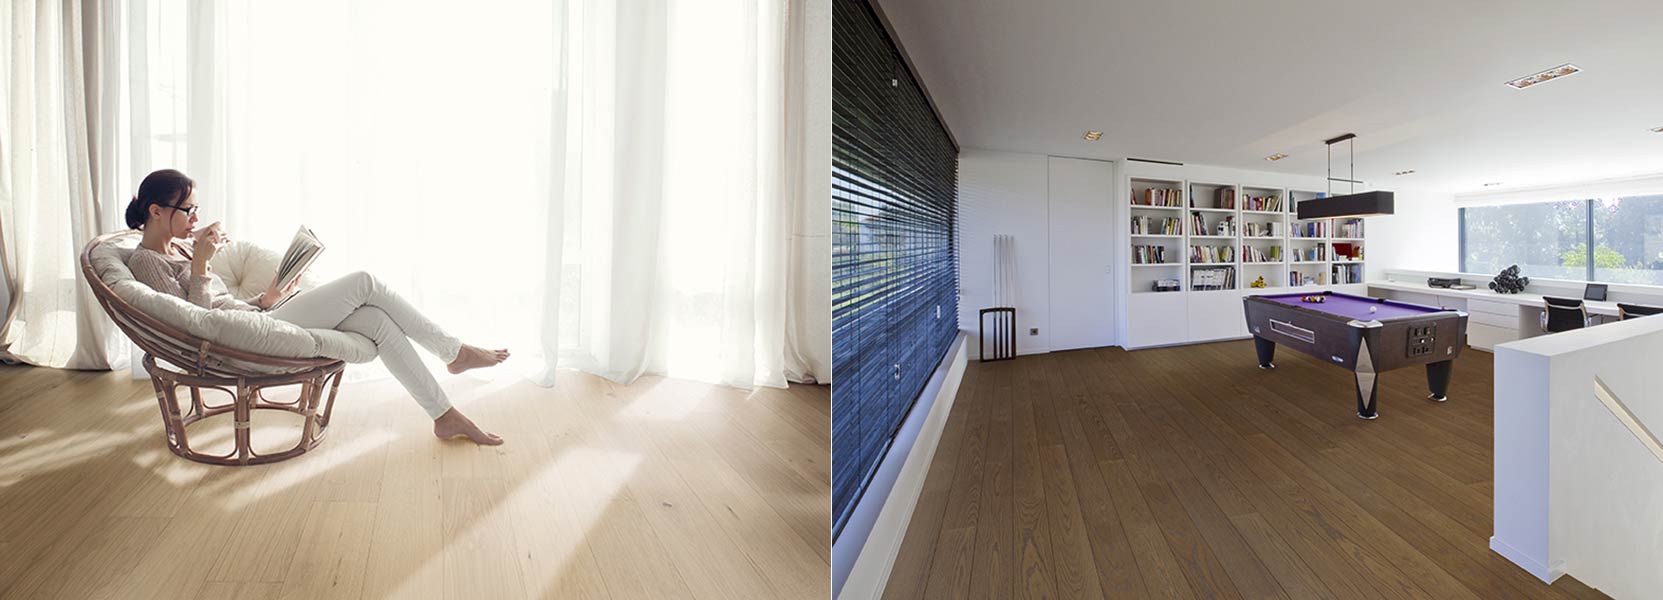 Discover ClicWood real wood flooring from Decospan